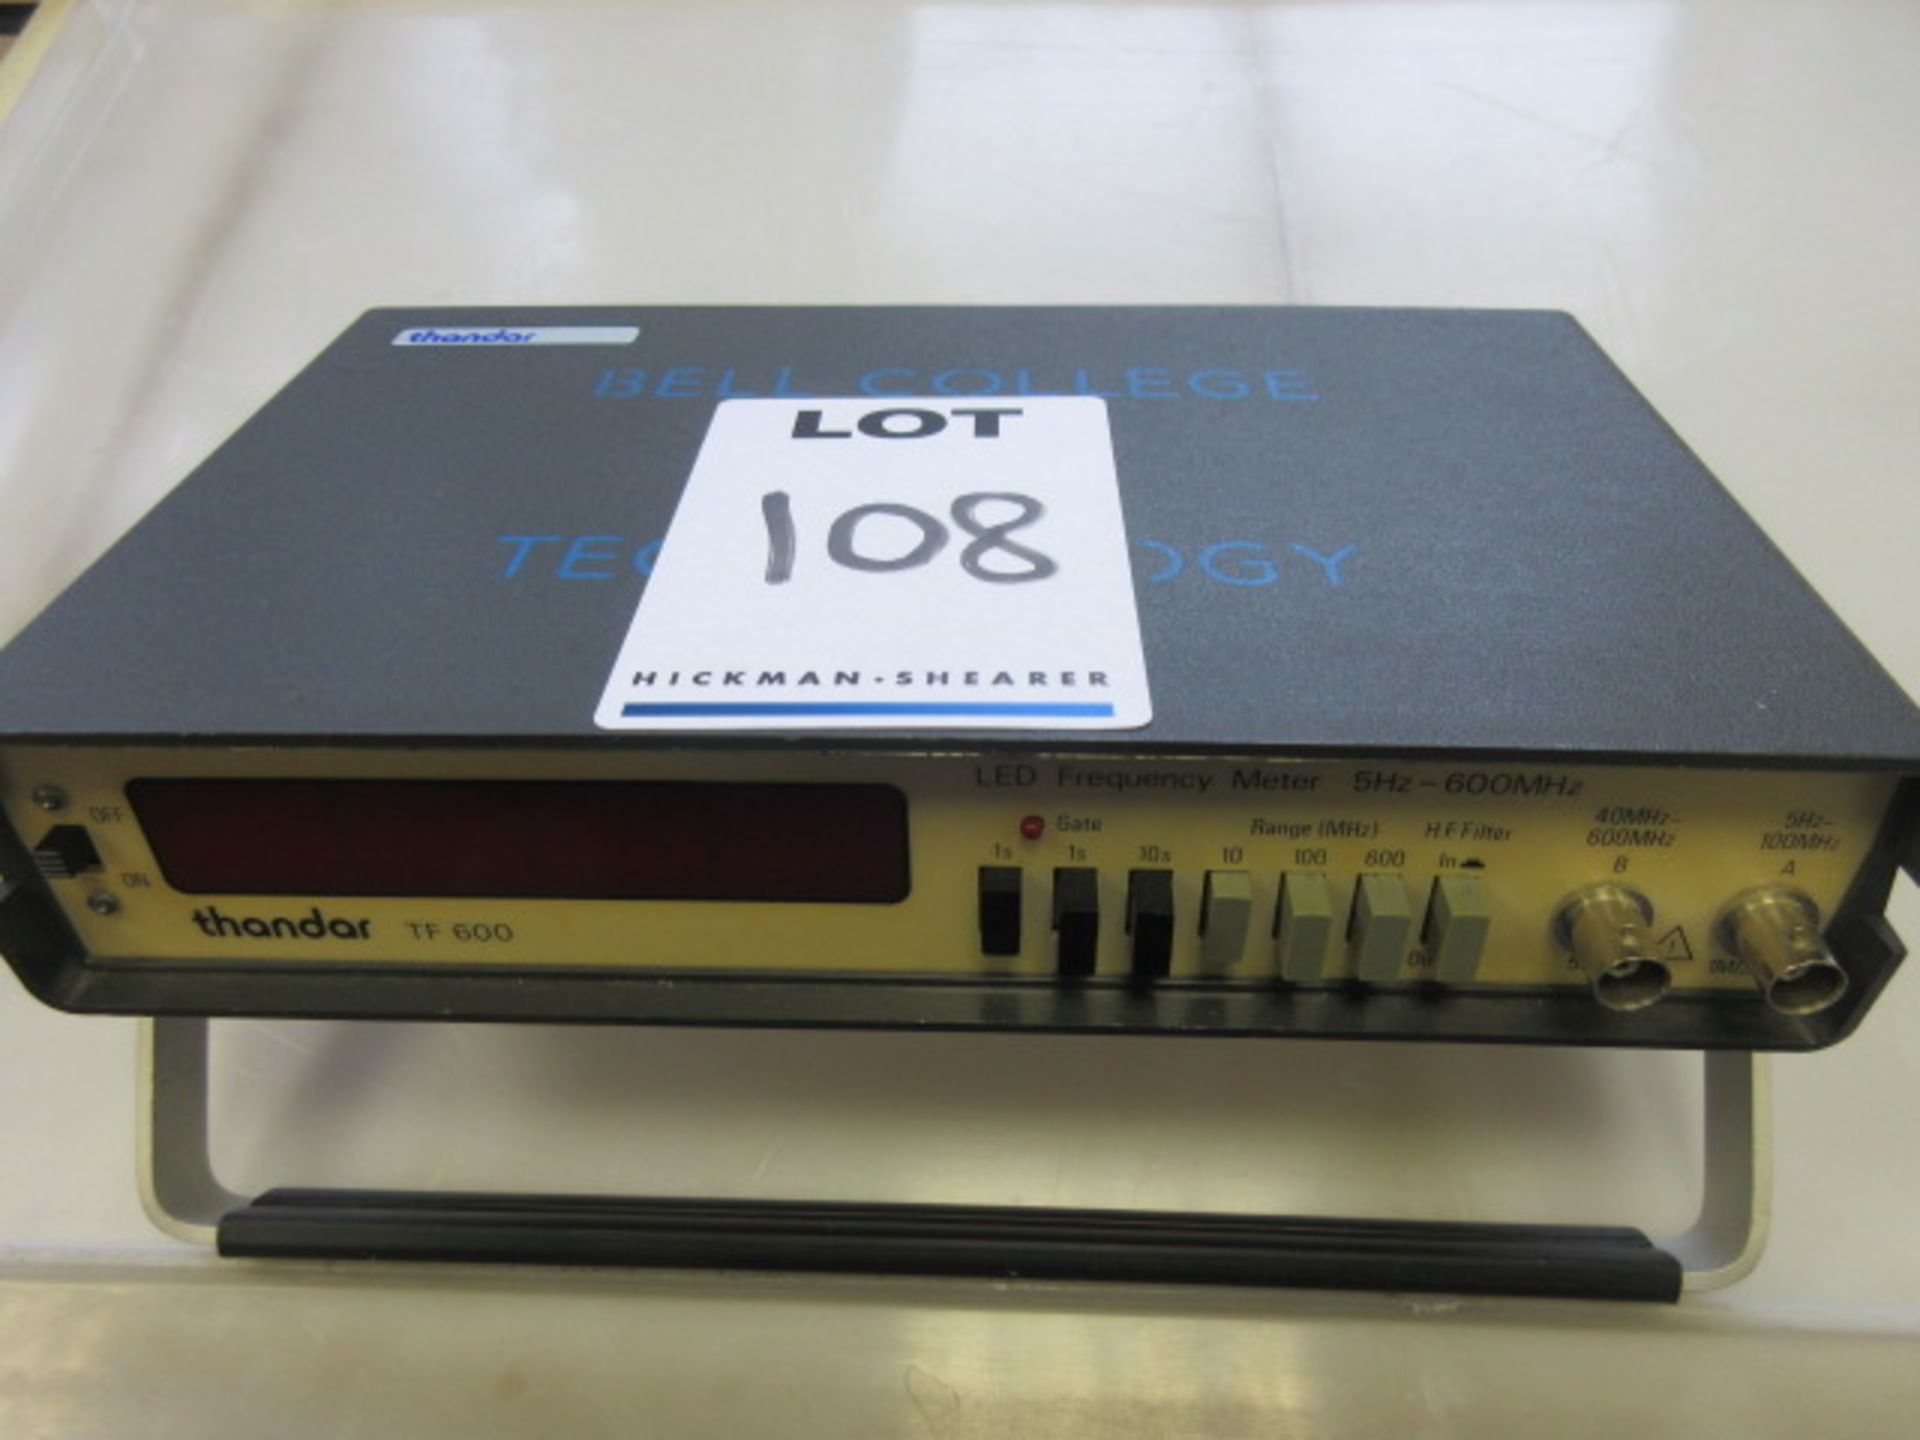 THANDAR TF 600 LED FREQUENCY METER 5Hz- 600 mhz - Image 2 of 2